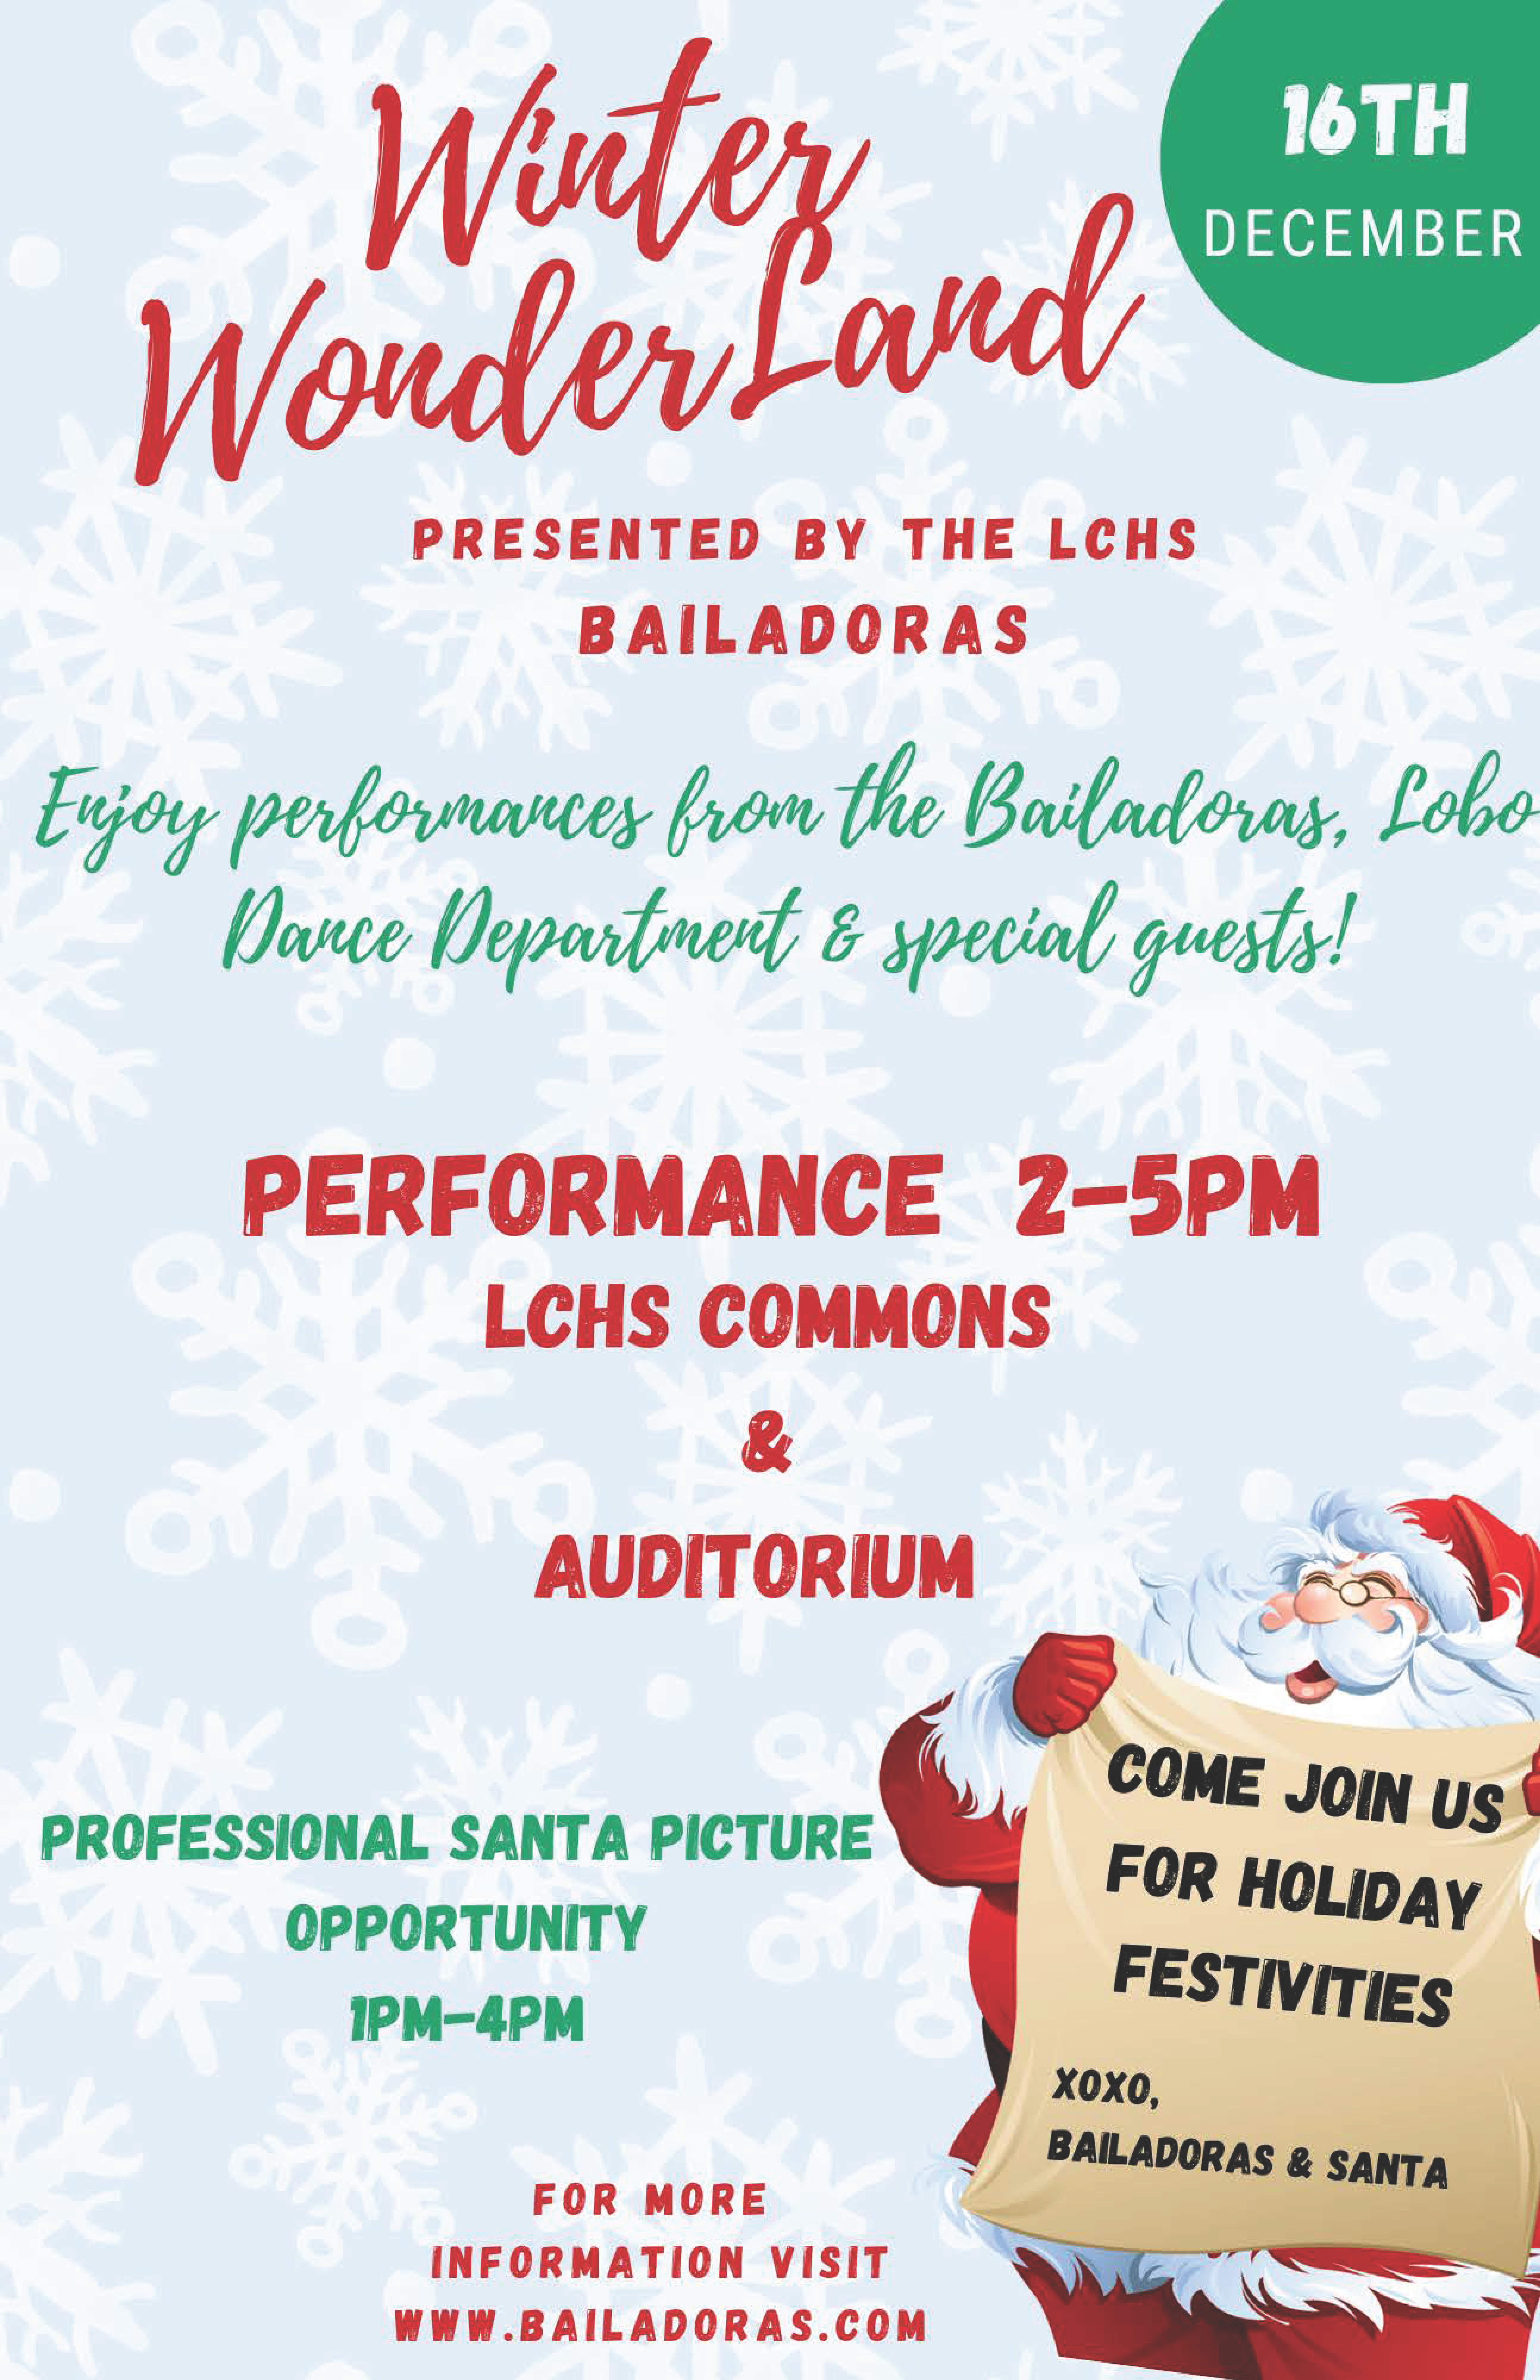 Winter Wonder Land presented by the LCHS Bailadoras  December 16, 2023   |   2-5 p.m. LCHS Commons & Auditorium  Enjoy performances from the Bailadoras, Lobo Dance Department and special guests!  Professional Santa picture opportunity 12-2 p.m.   For information visit www.bailadoras.com